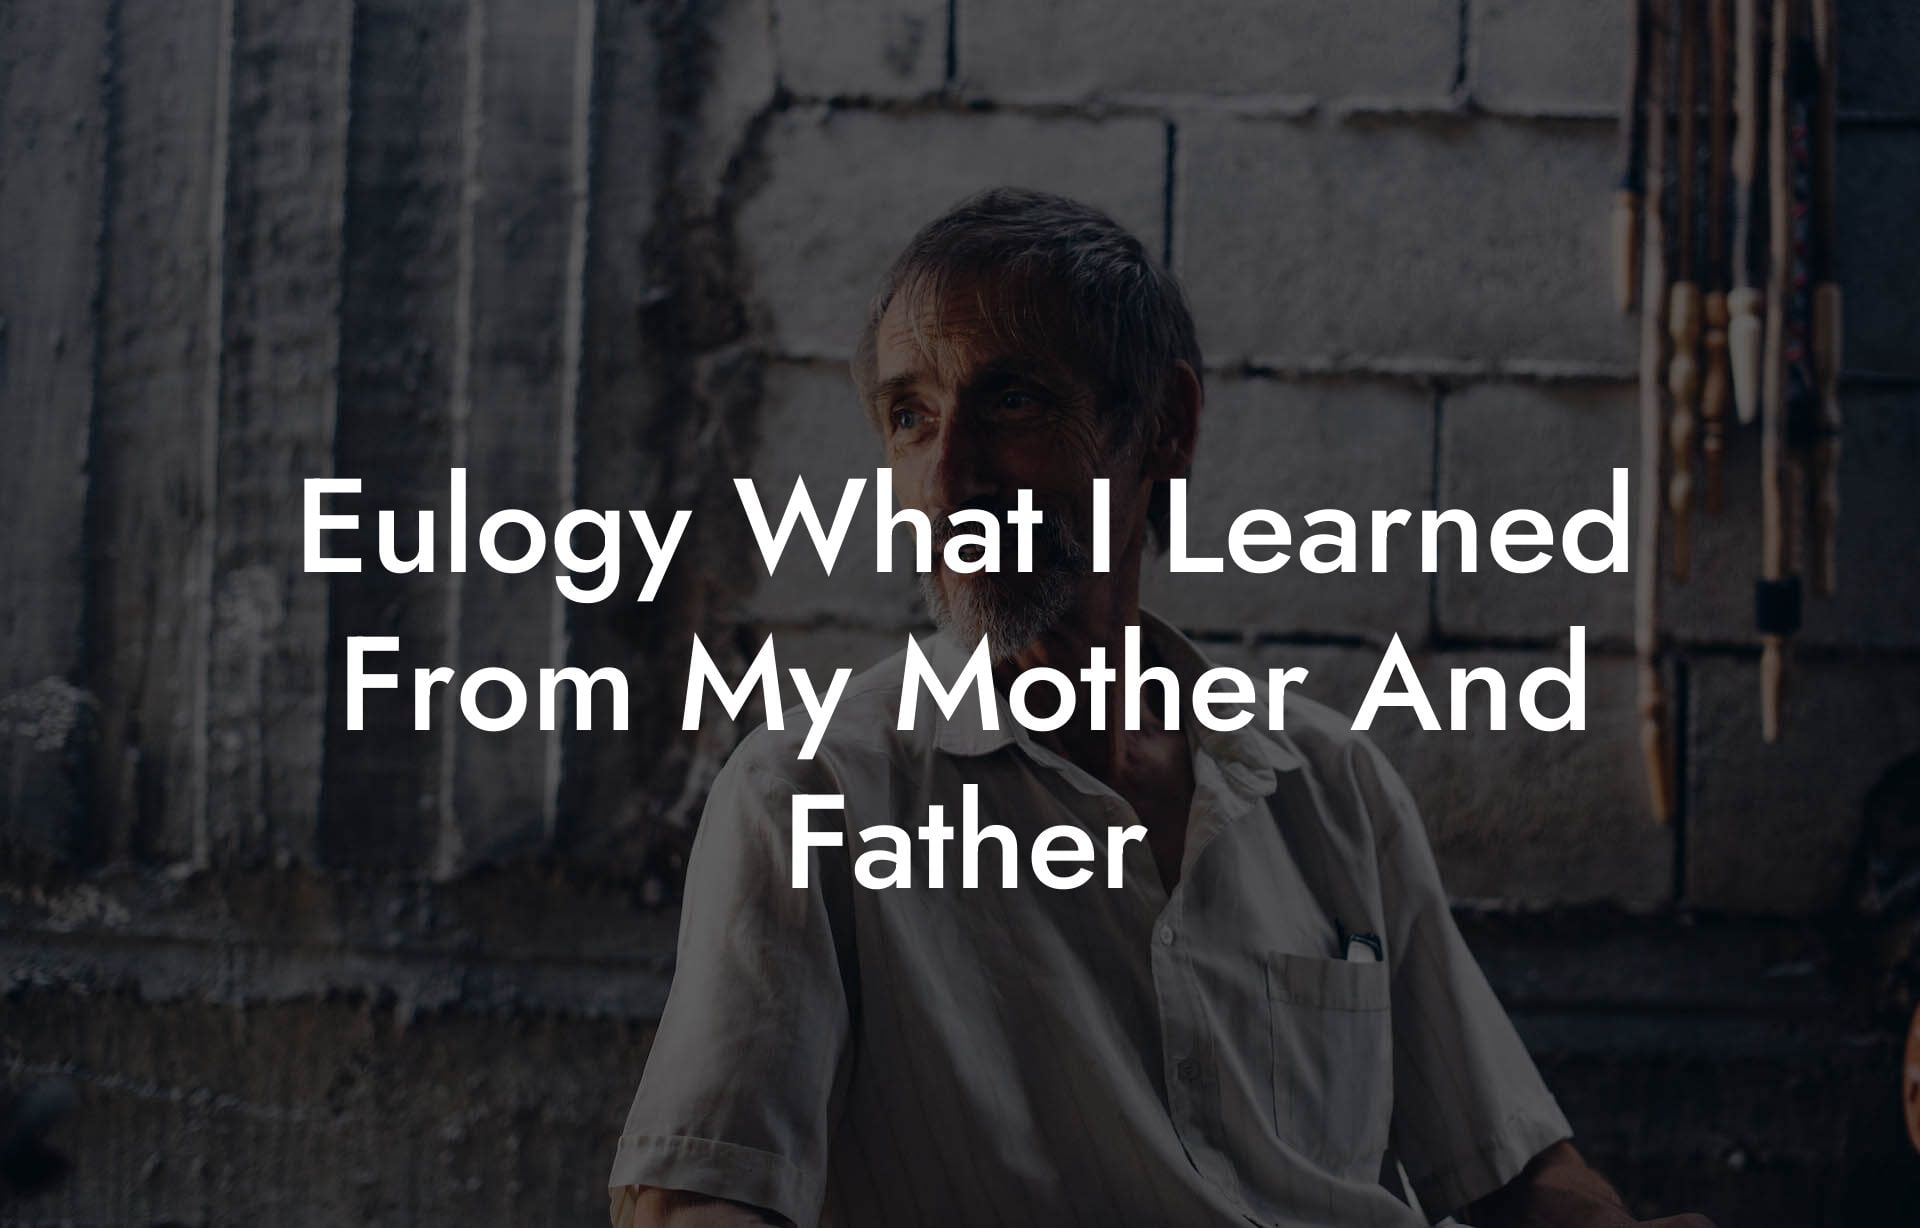 Eulogy What I Learned From My Mother And Father